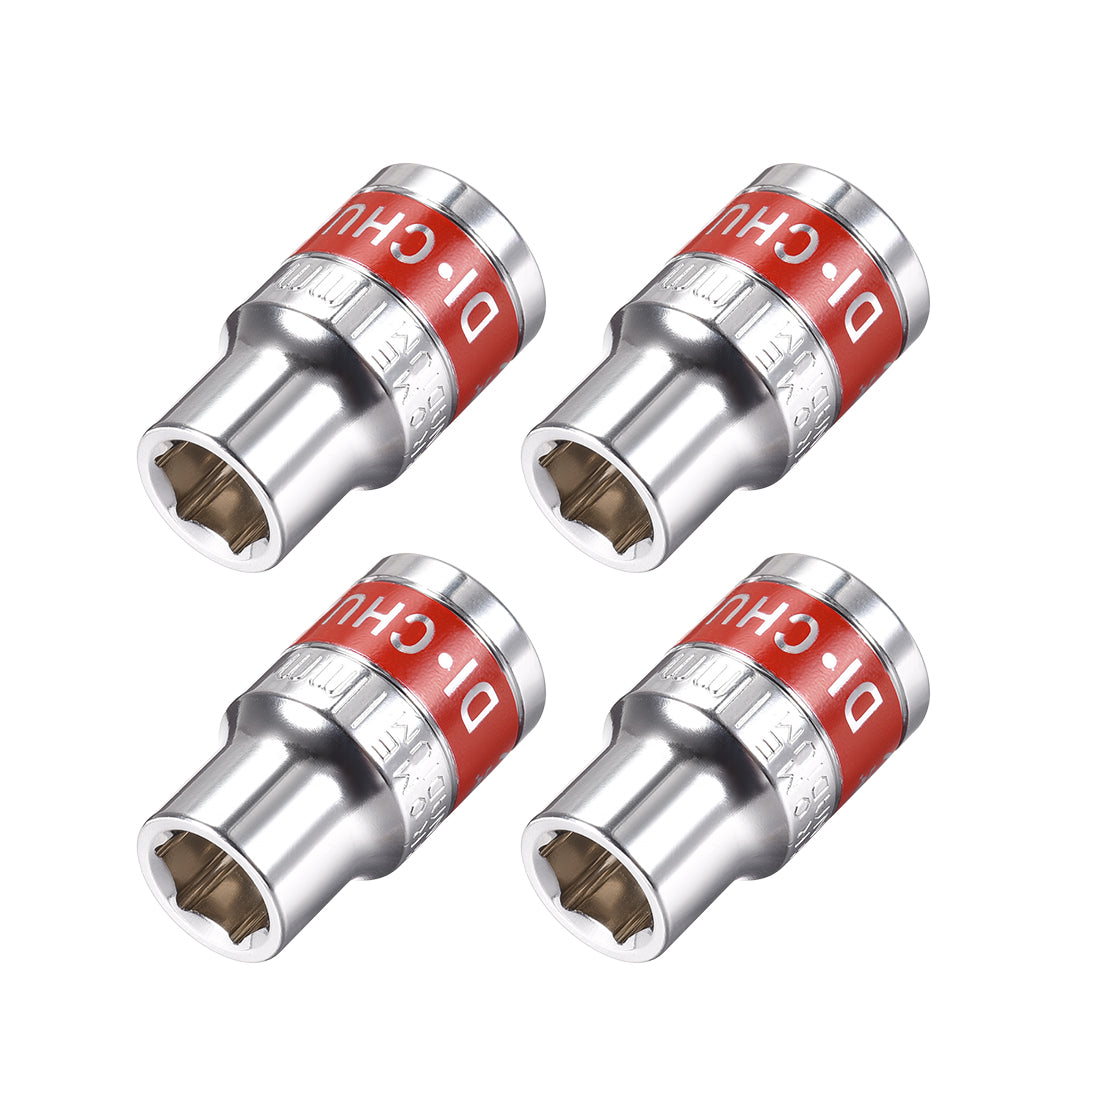 uxcell Uxcell 4 Pcs 1/2-Inch Drive by 11mm Shallow Socket with Red Band, Cr-V, 6-Point, Metric